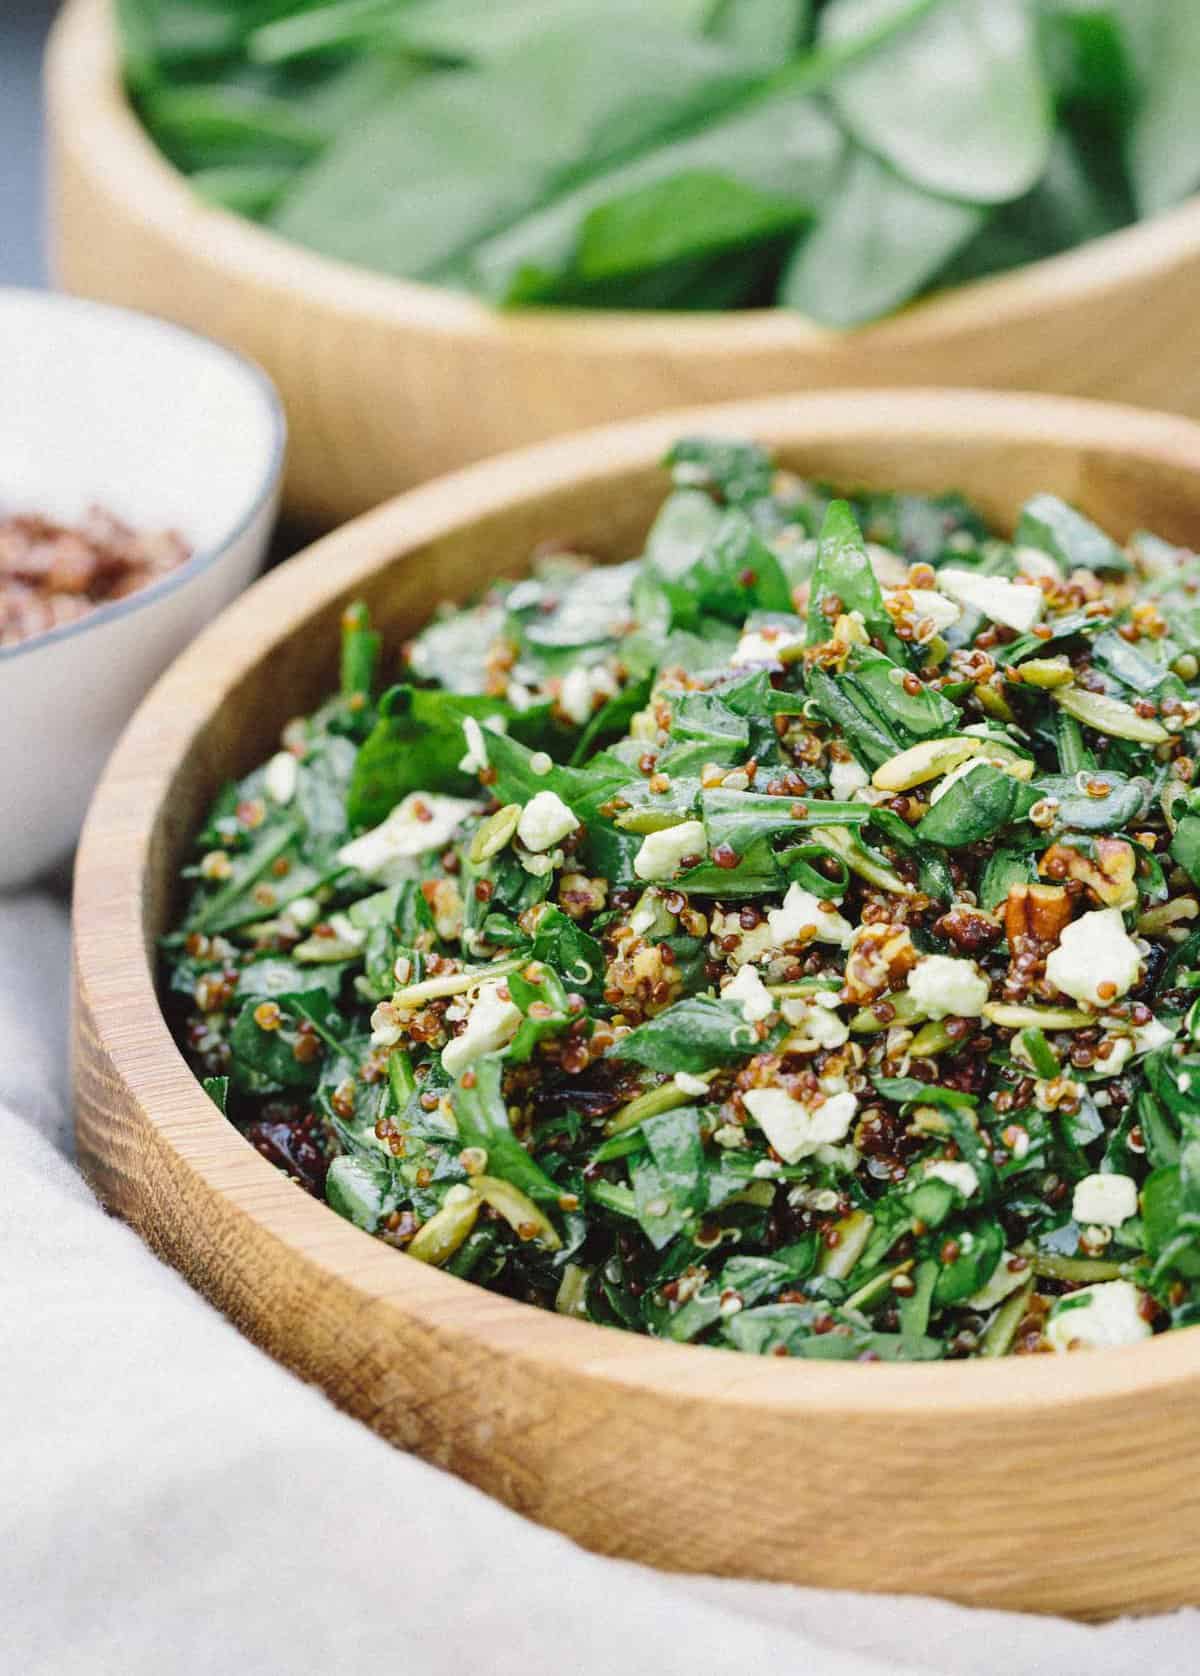 An easy yet elegant nutty spinach and quinoa salad that is perfect as any side accompaniment to any meal! #sidesalad #quinoa #spinachsalad #easysalad #saladrecipe #babyspinach #pumpkinseeds